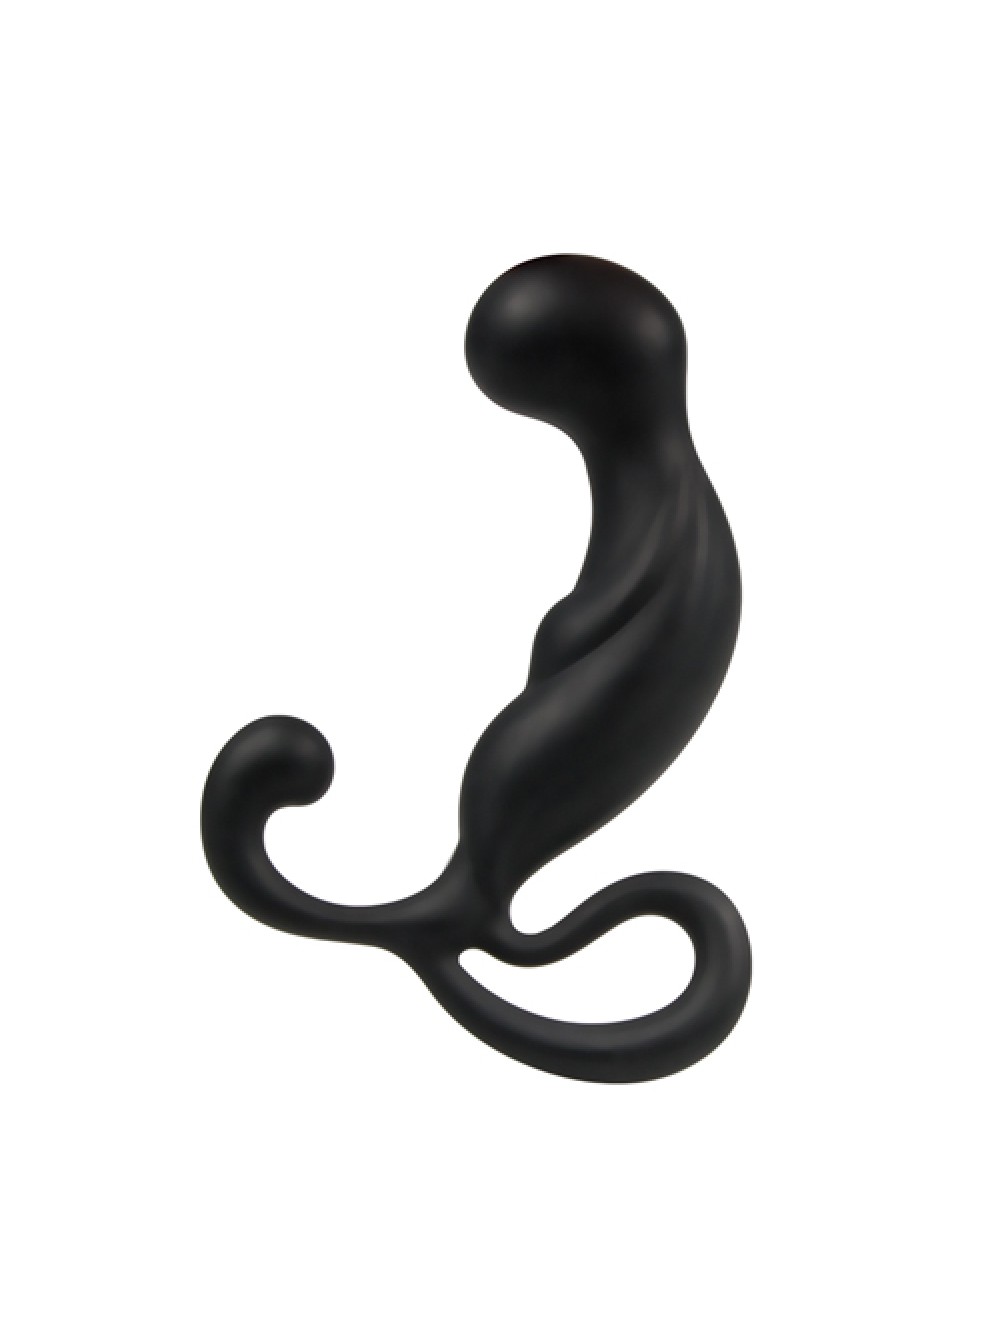 Prostatic Play Pathfinder Silicone Prostate Plug with Angled Head